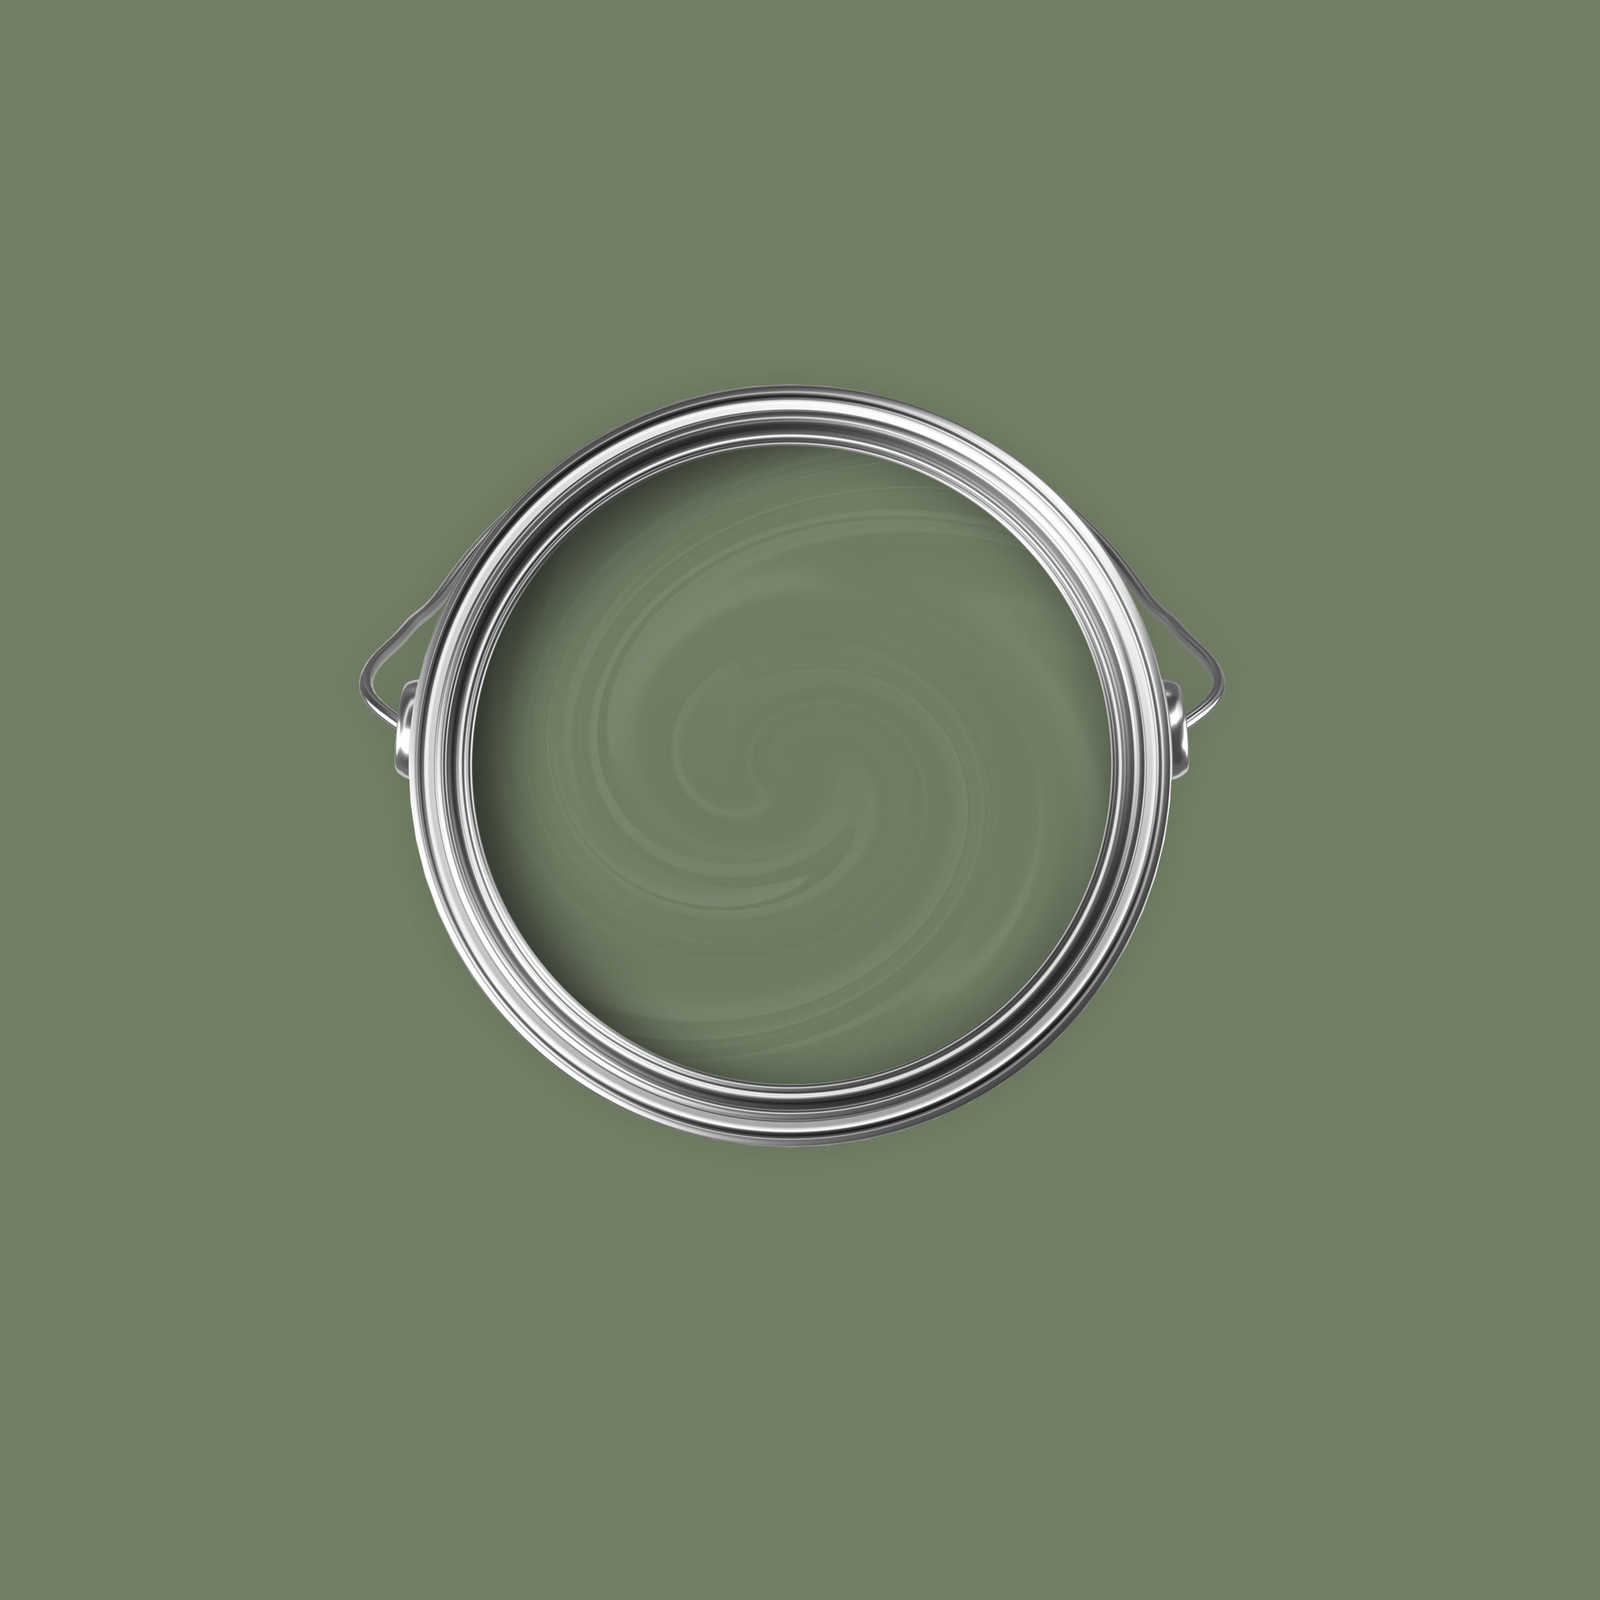             Premium Wall Paint Relaxing Olive Green »Gorgeous Green« NW504 – 2.5 litre
        